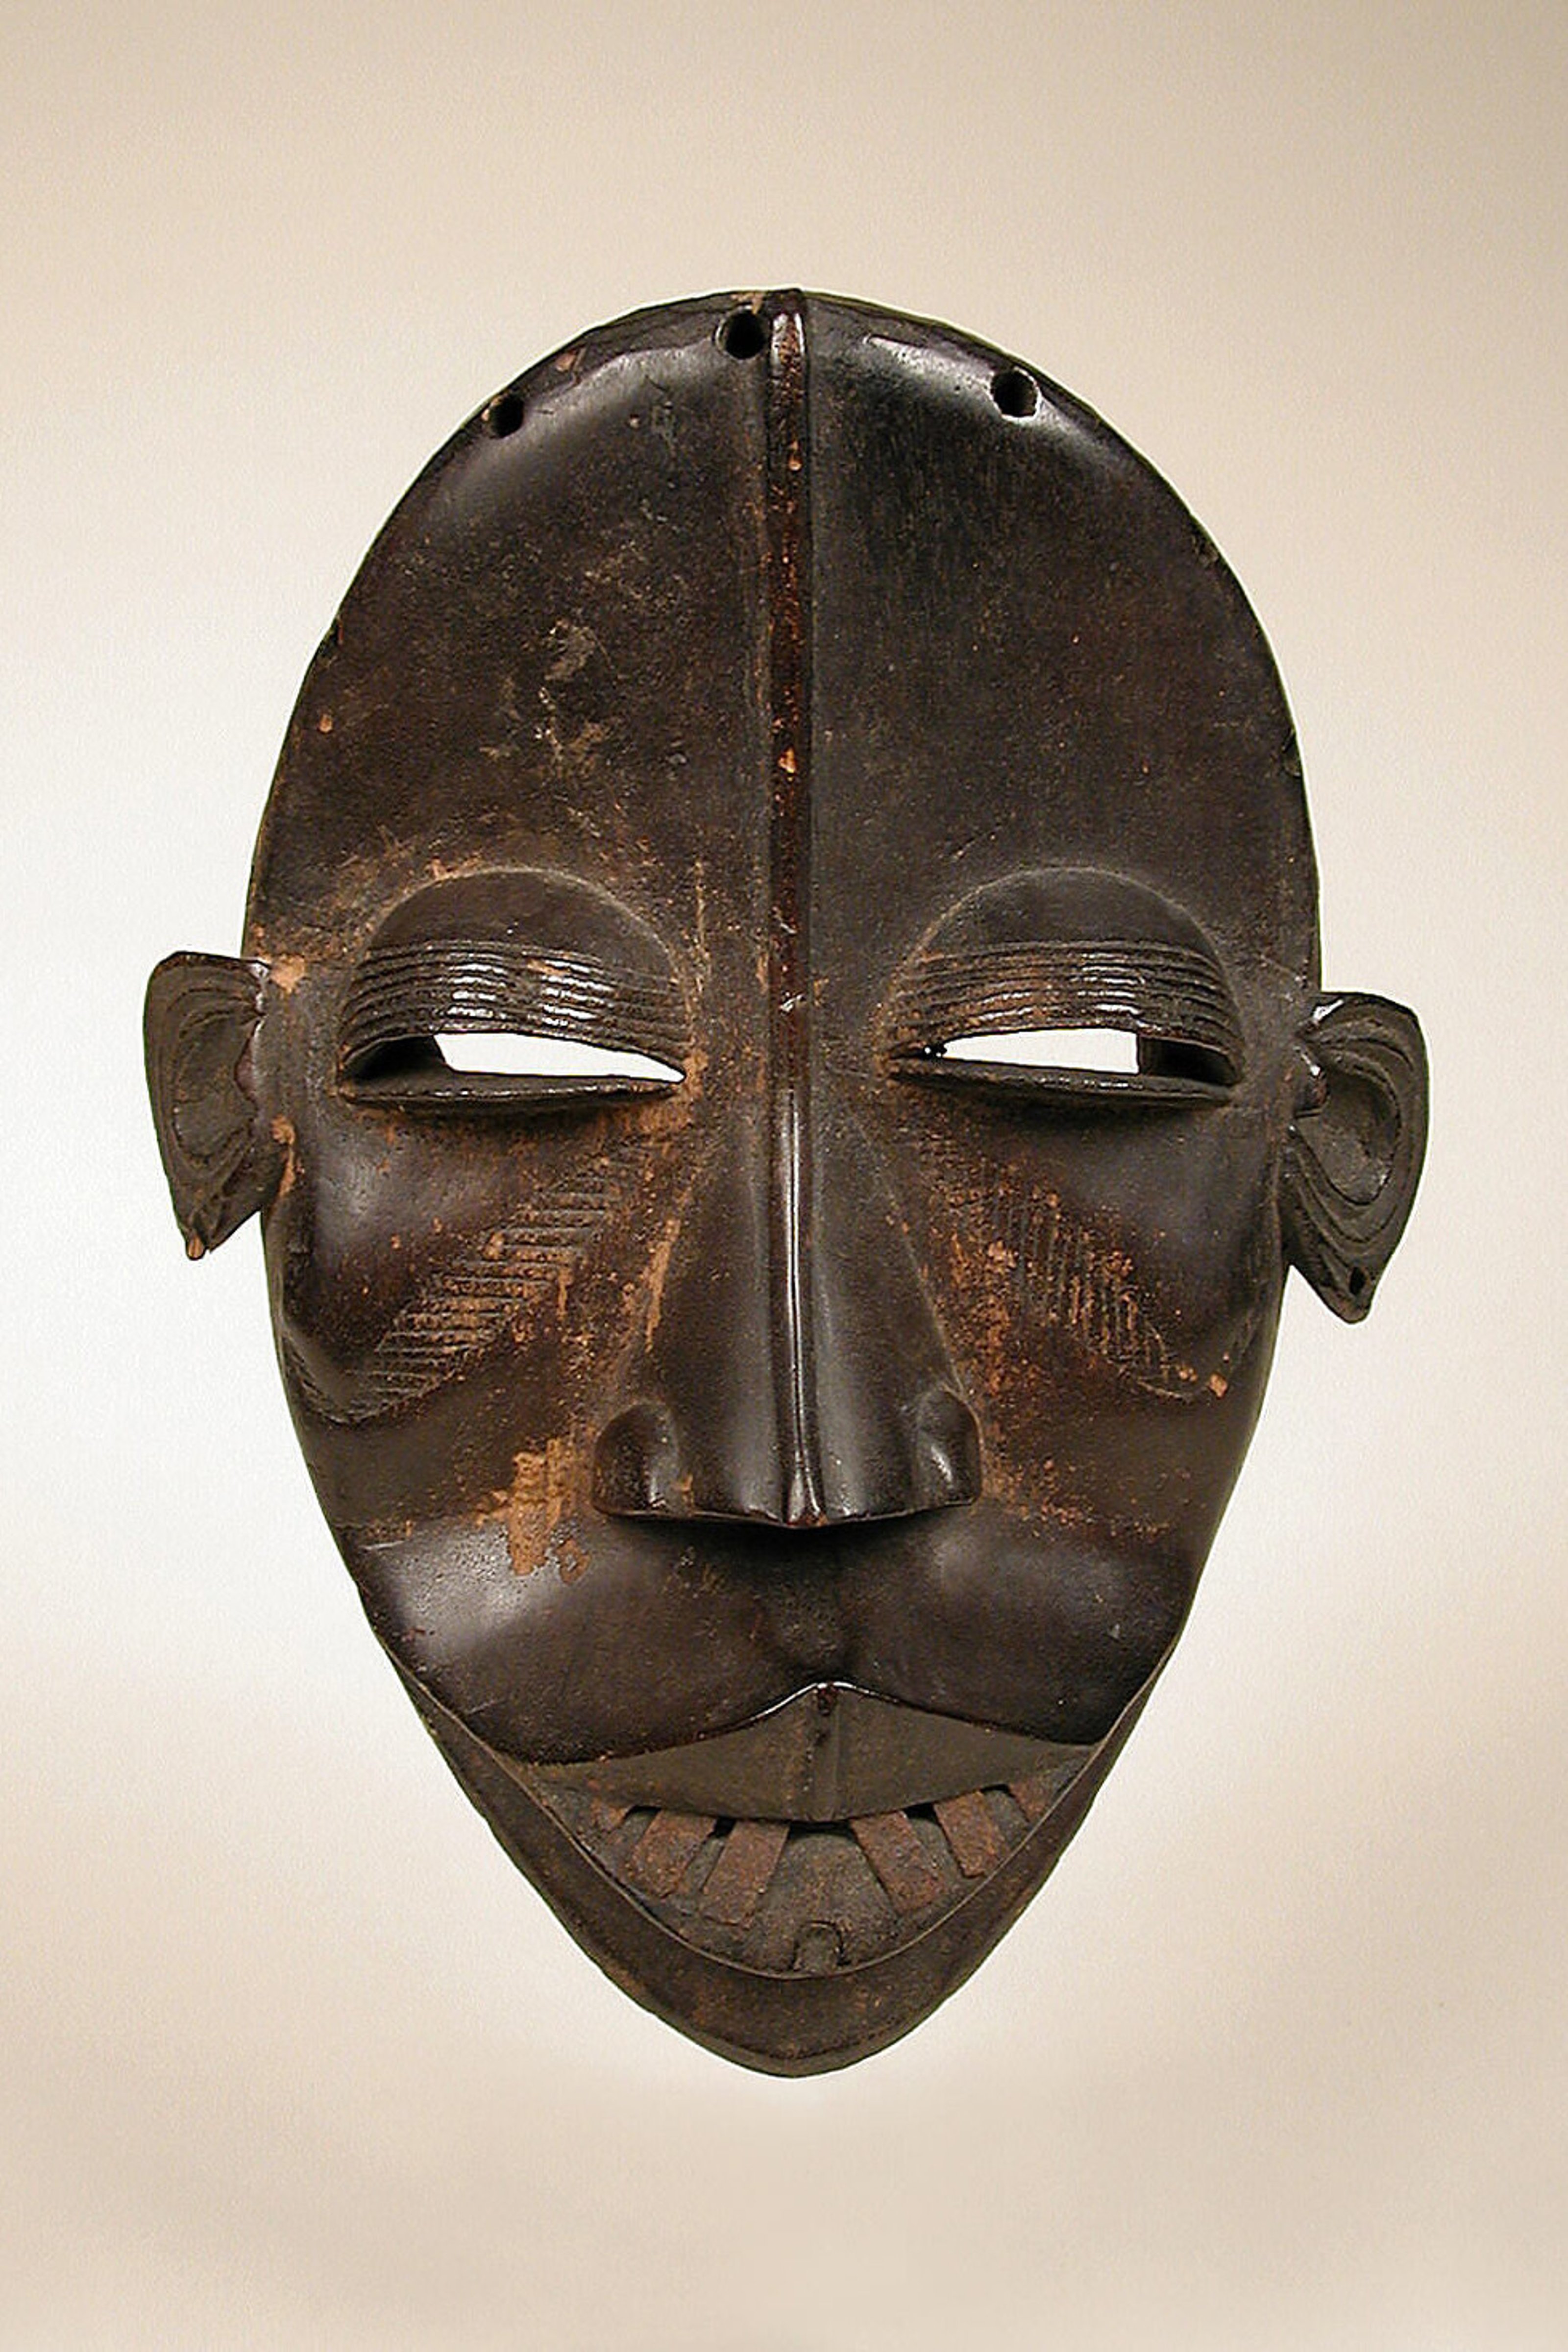 African face mask made of wood.